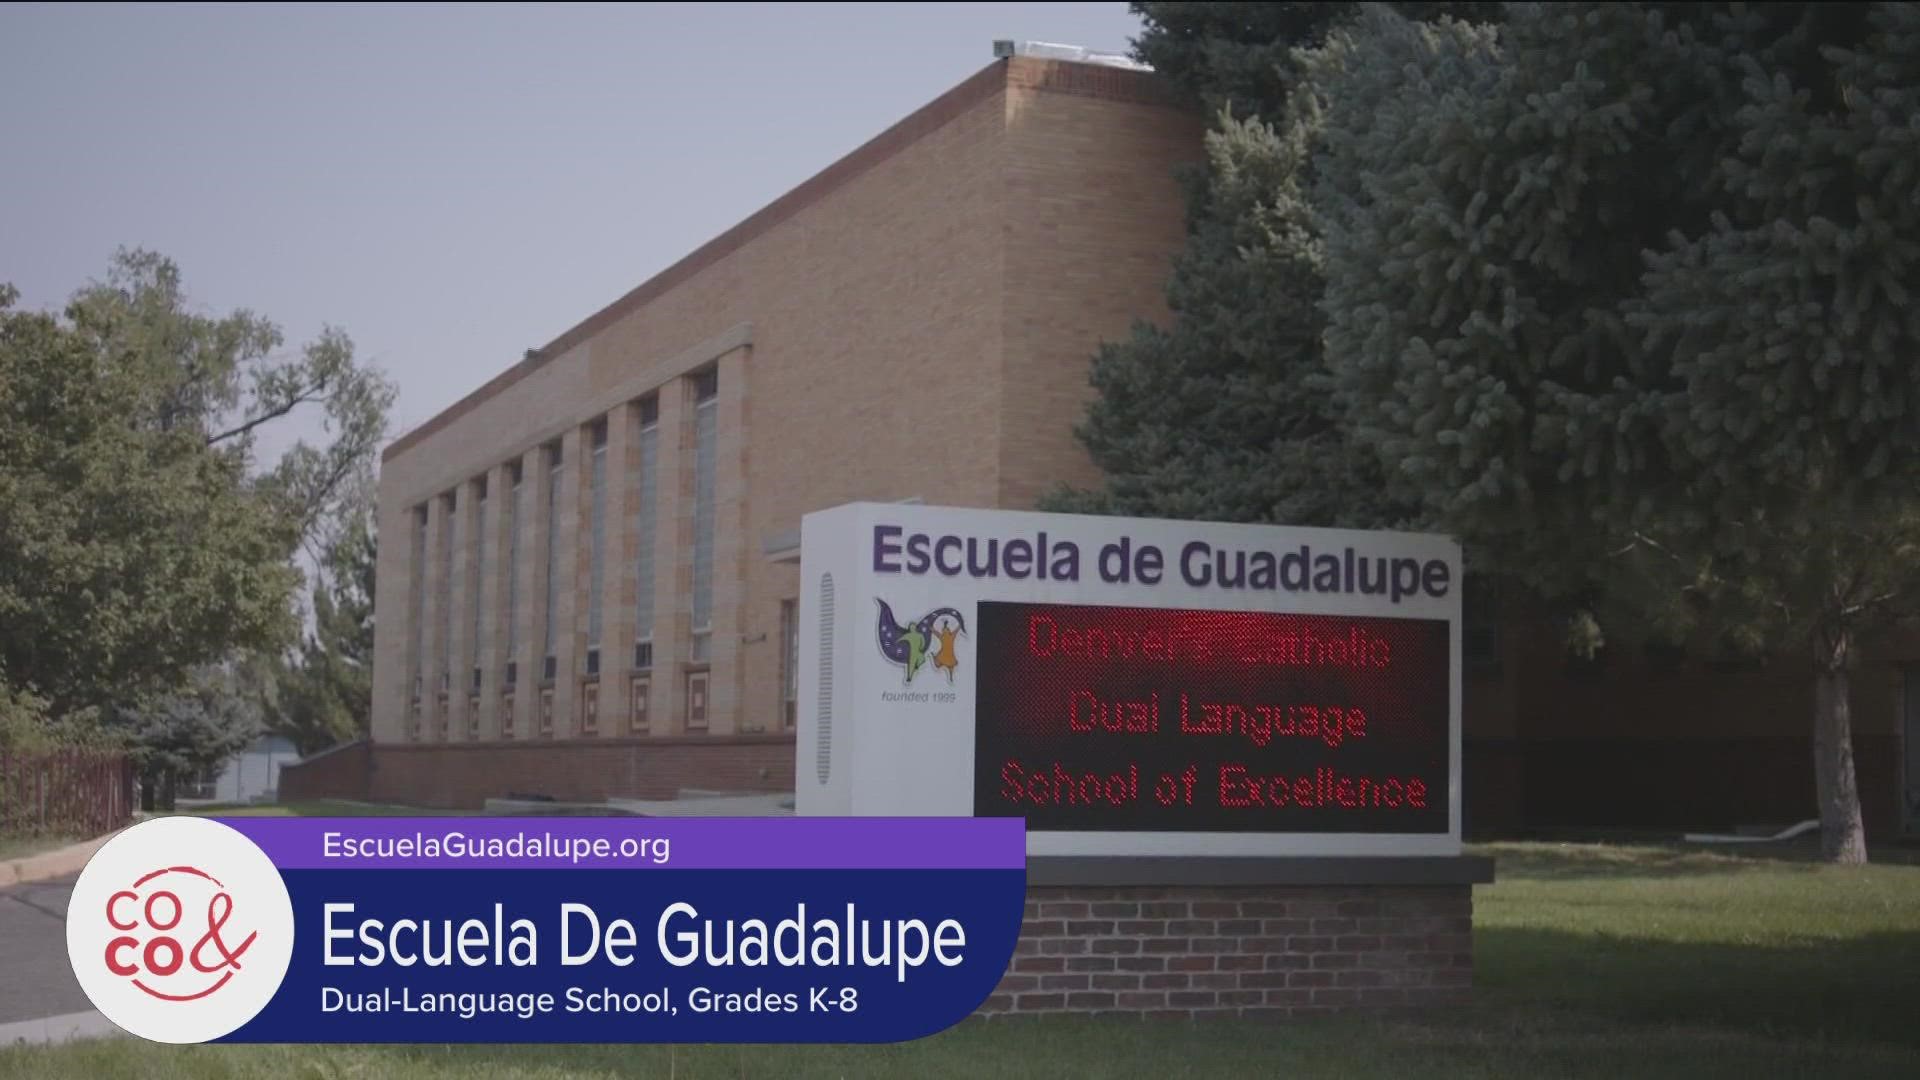 Learn about Escuela de Guadalupe's mission and everything they do by visiting the EscuelaGuadalupe.org. You can also call them for more info at 303-964-8456.